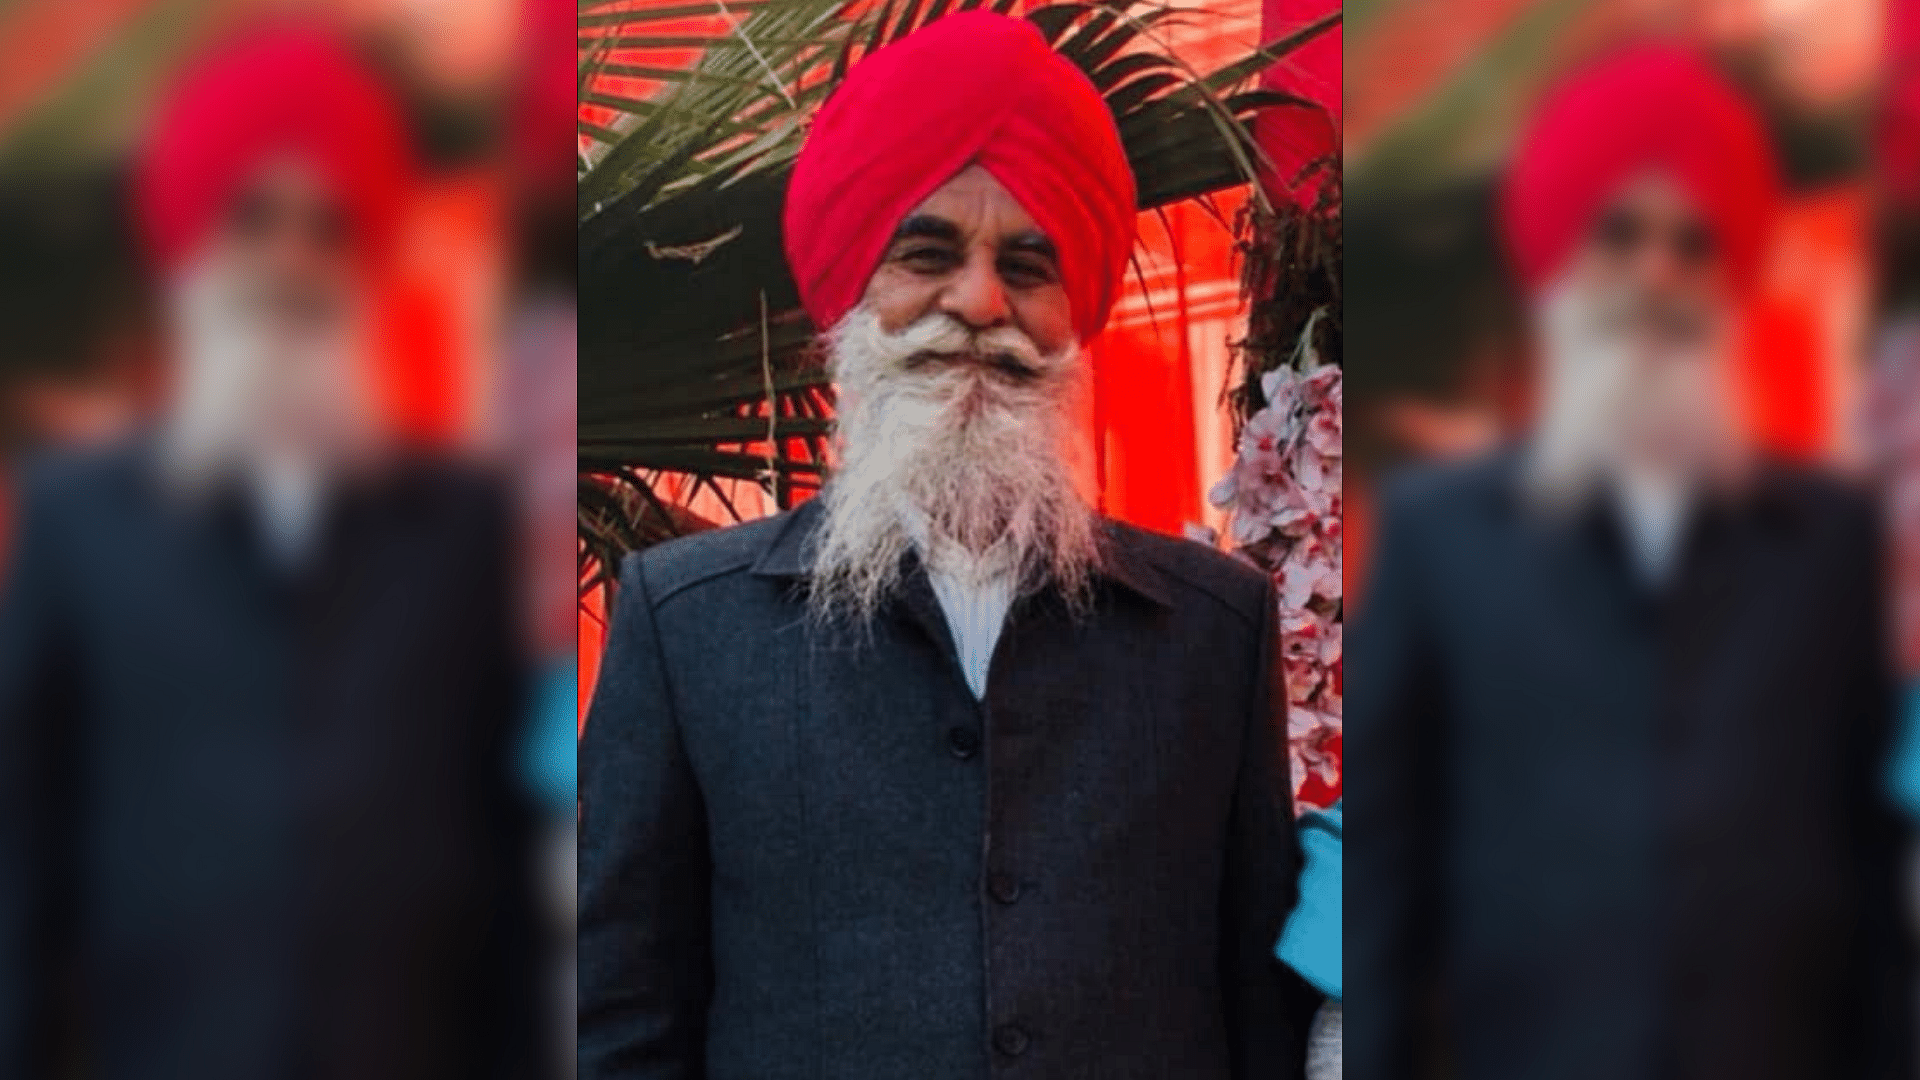 Parmjit Singh, a 64-year-old Sikh man from India, was stabbed to death in US.